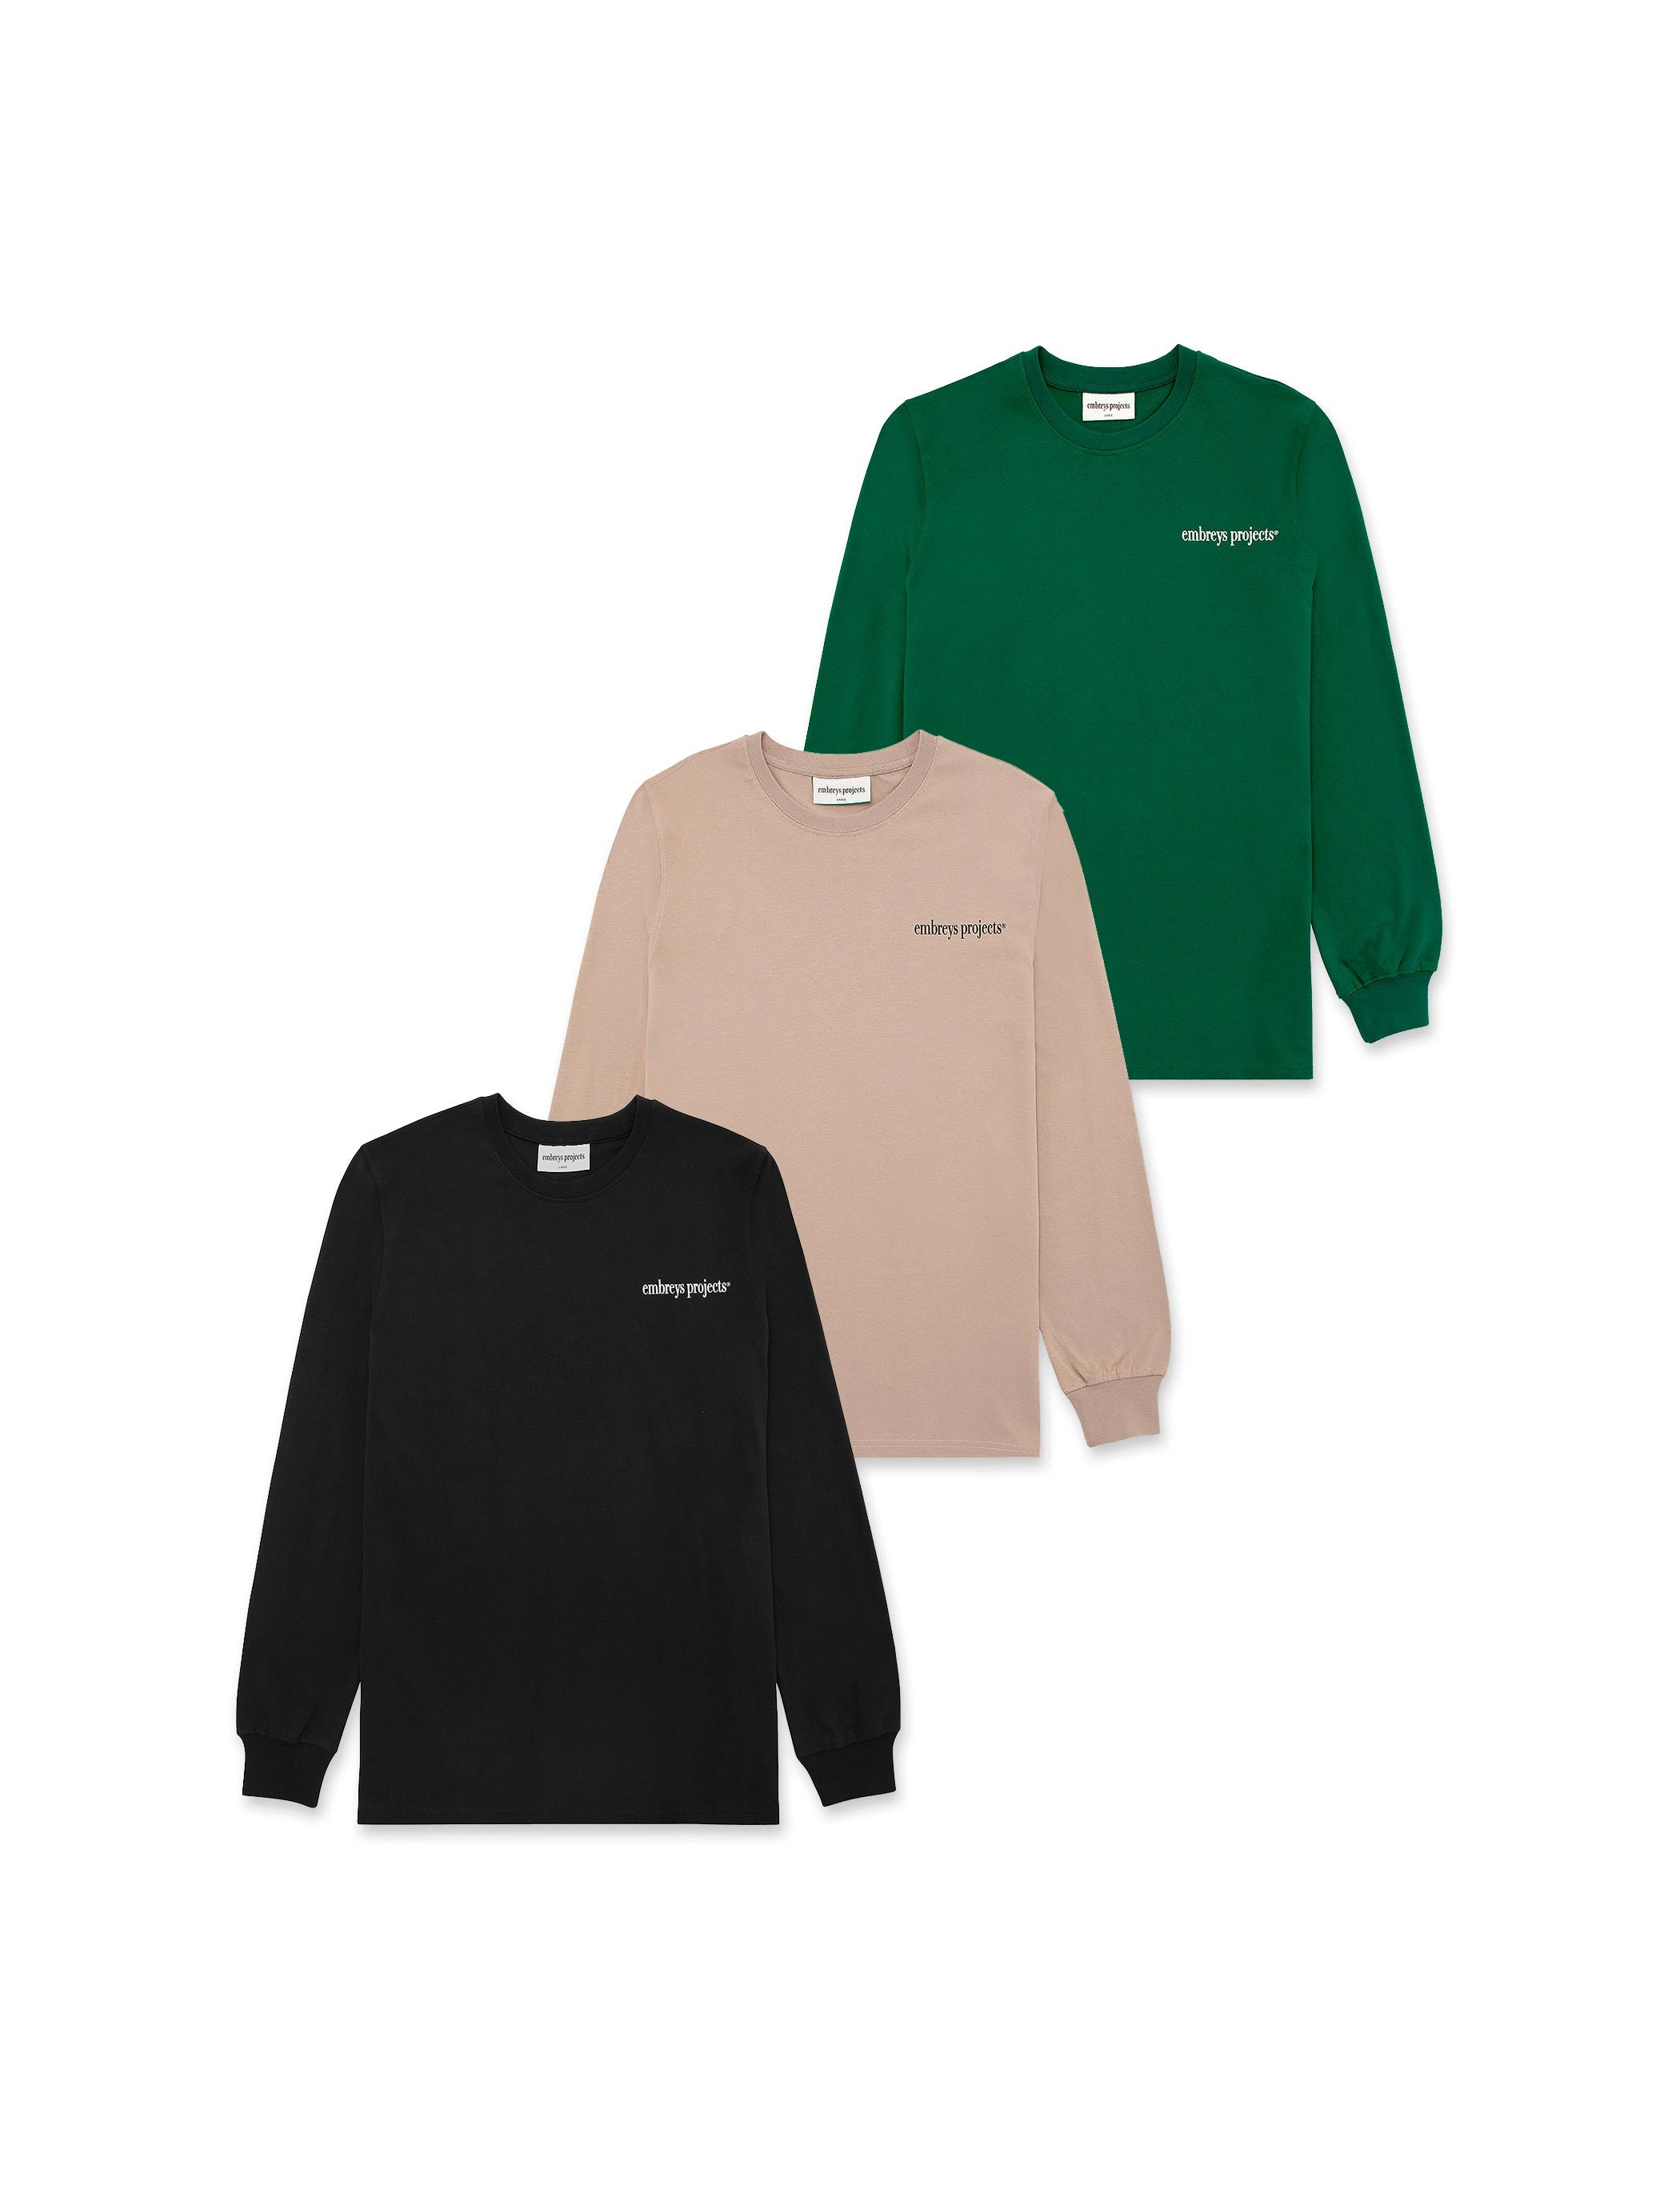 3-PACK ★ VISIONARY LS TEE (sort, beige & grøn) (W) - Embreys Projects